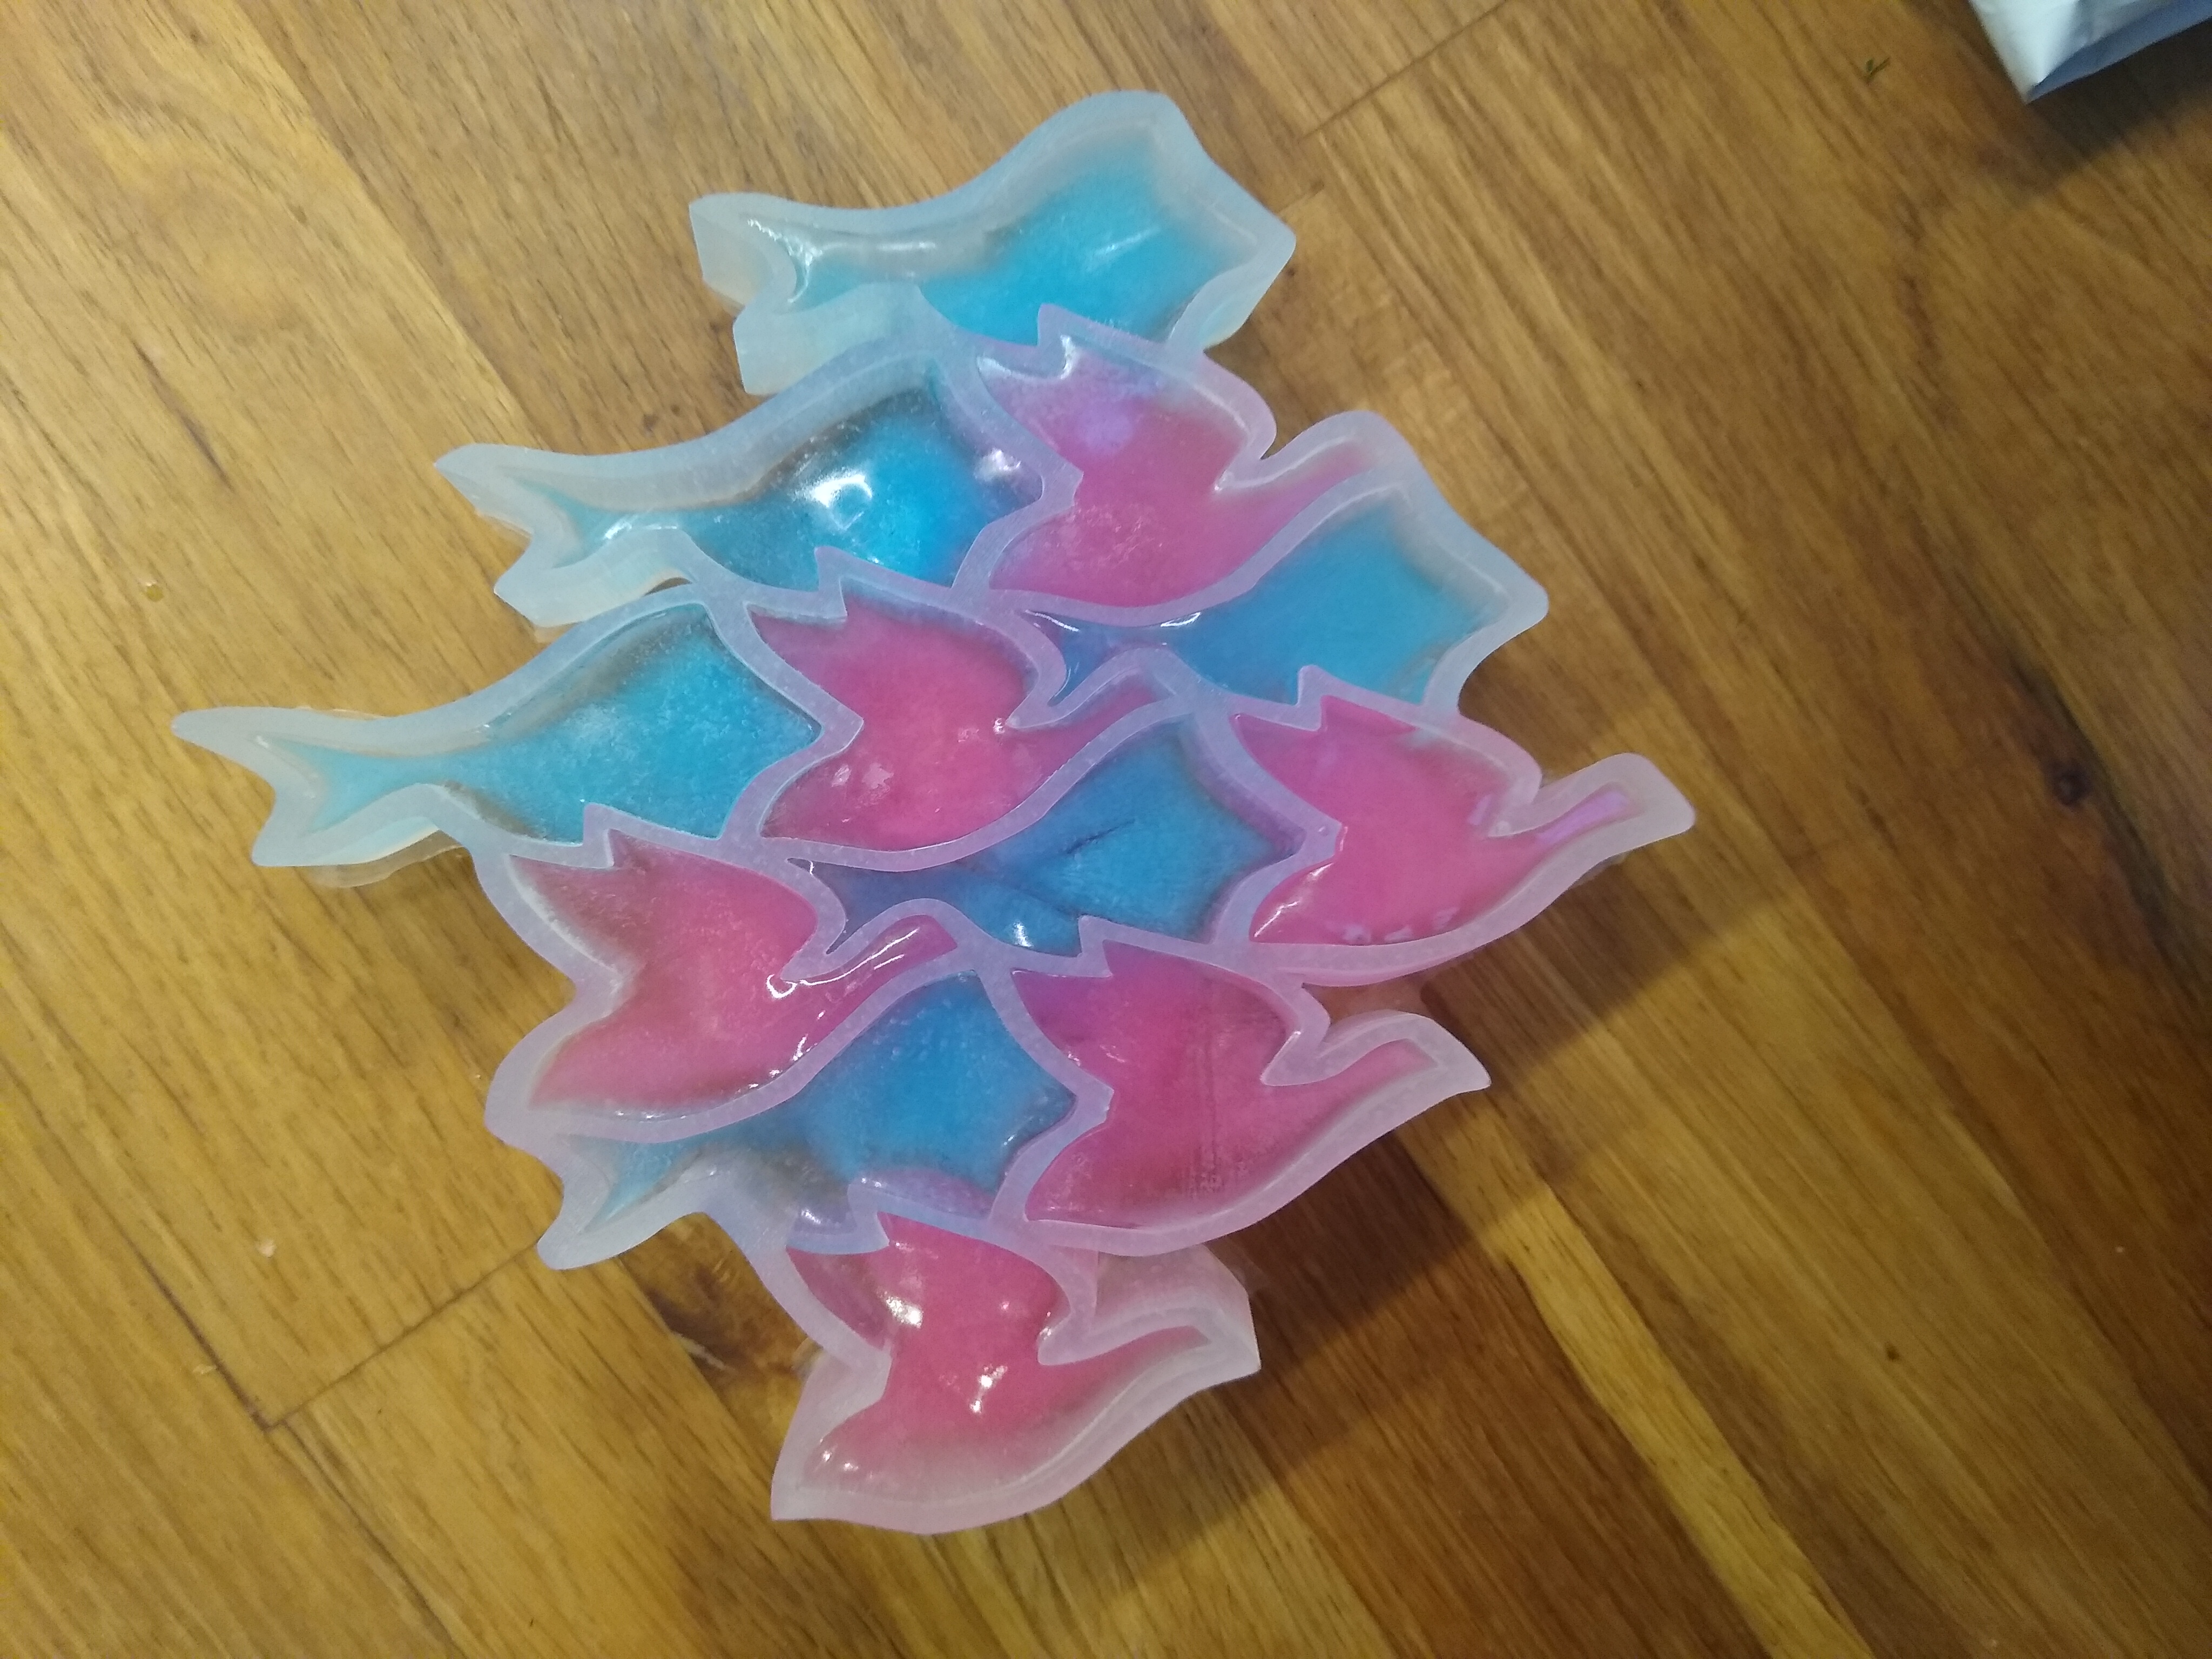 The mold filled with colored ice.